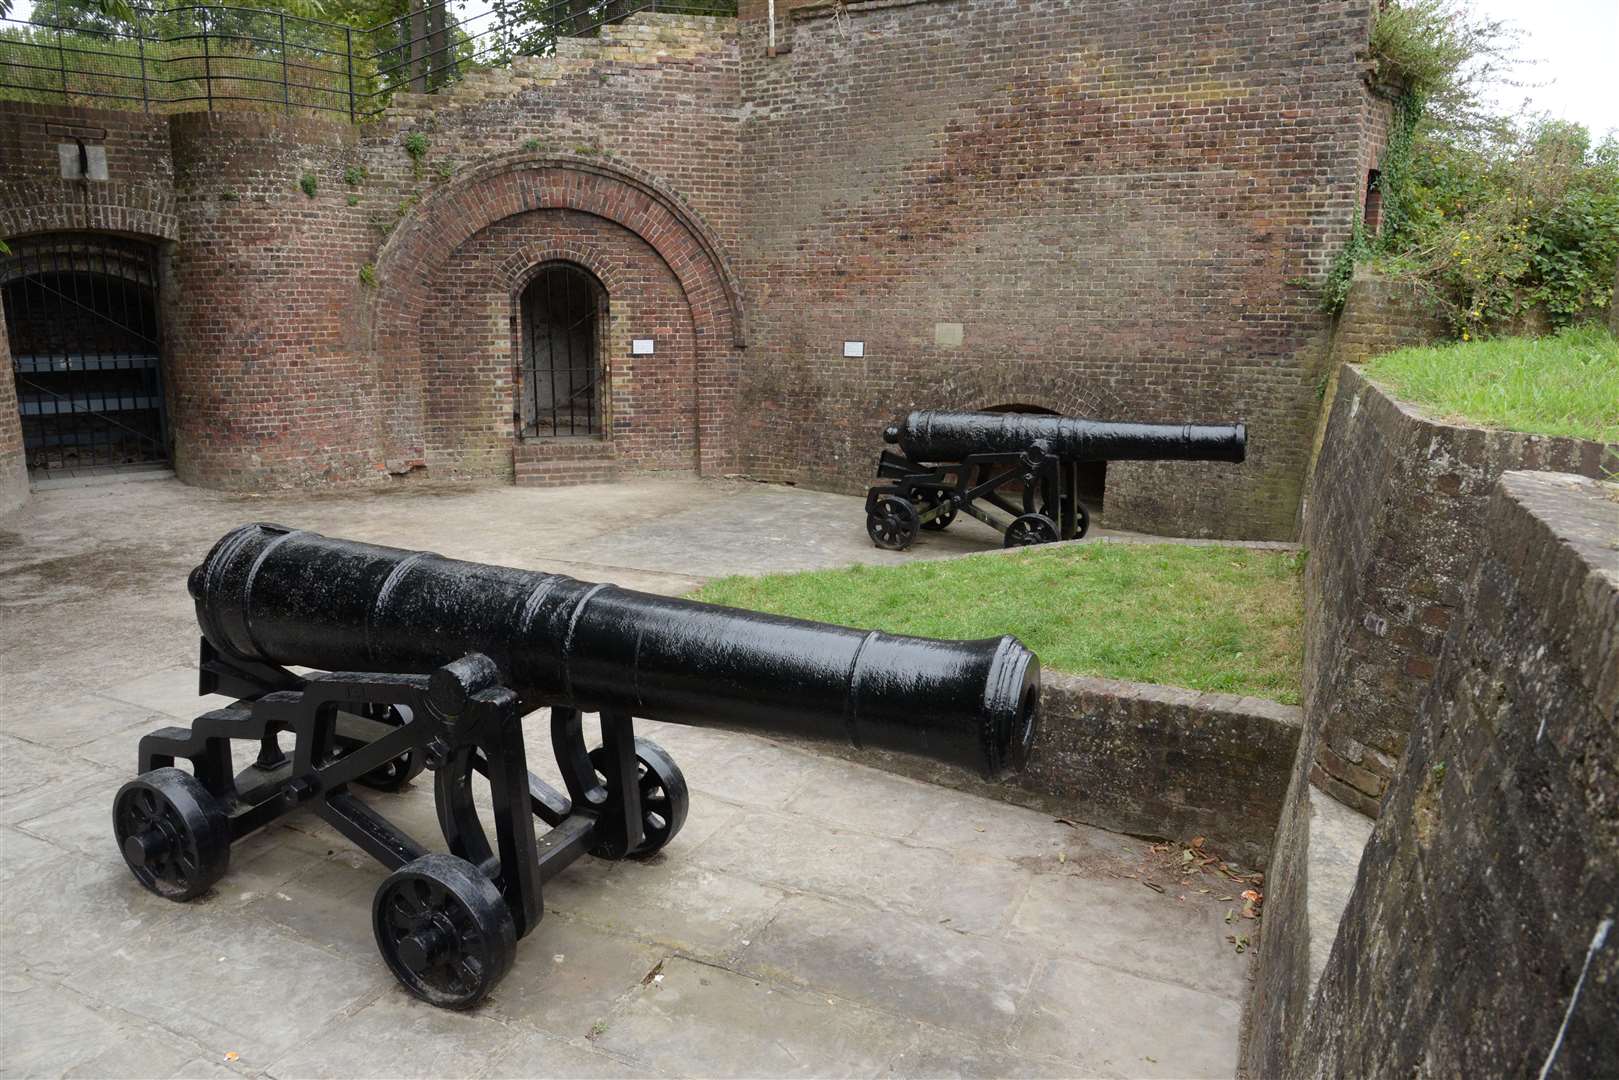 The guns will be fired from Fort Amherst. Picture: Chris Davey